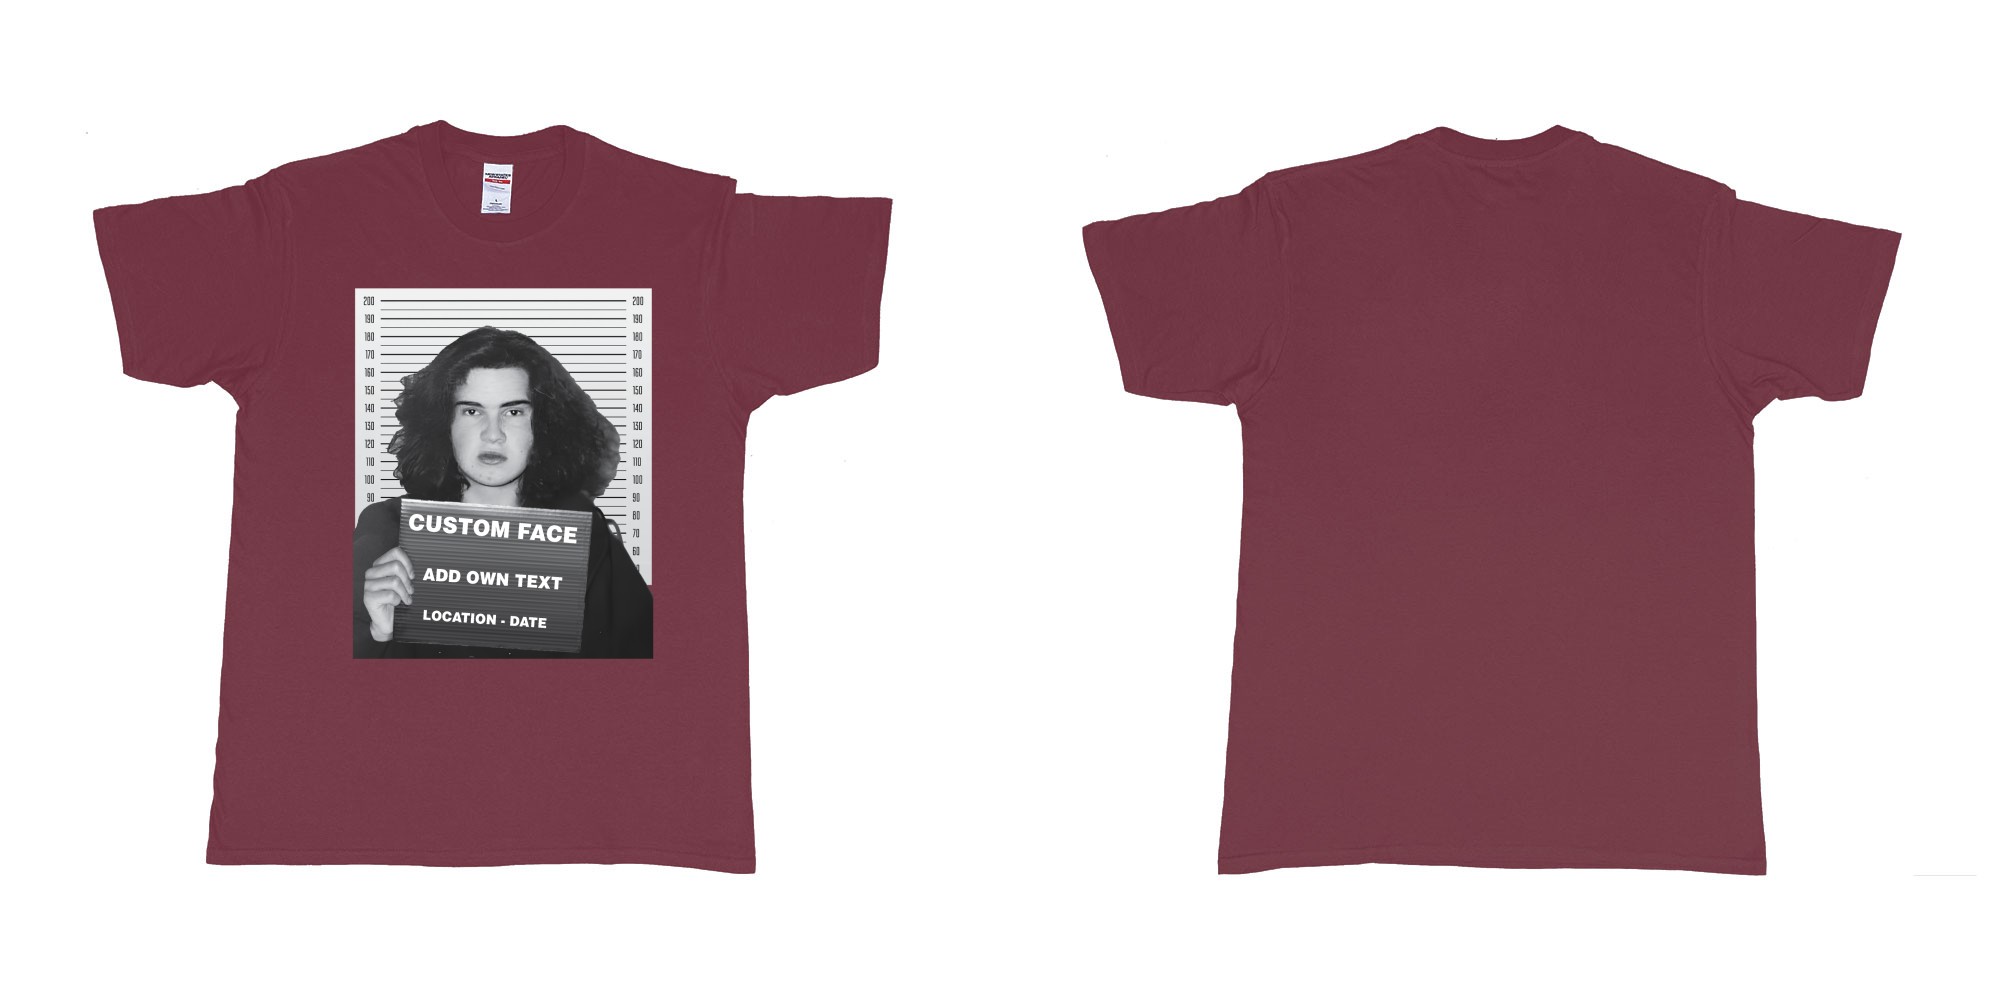 Custom tshirt design jimmy carr arrested bali mugshot in fabric color marron choice your own text made in Bali by The Pirate Way